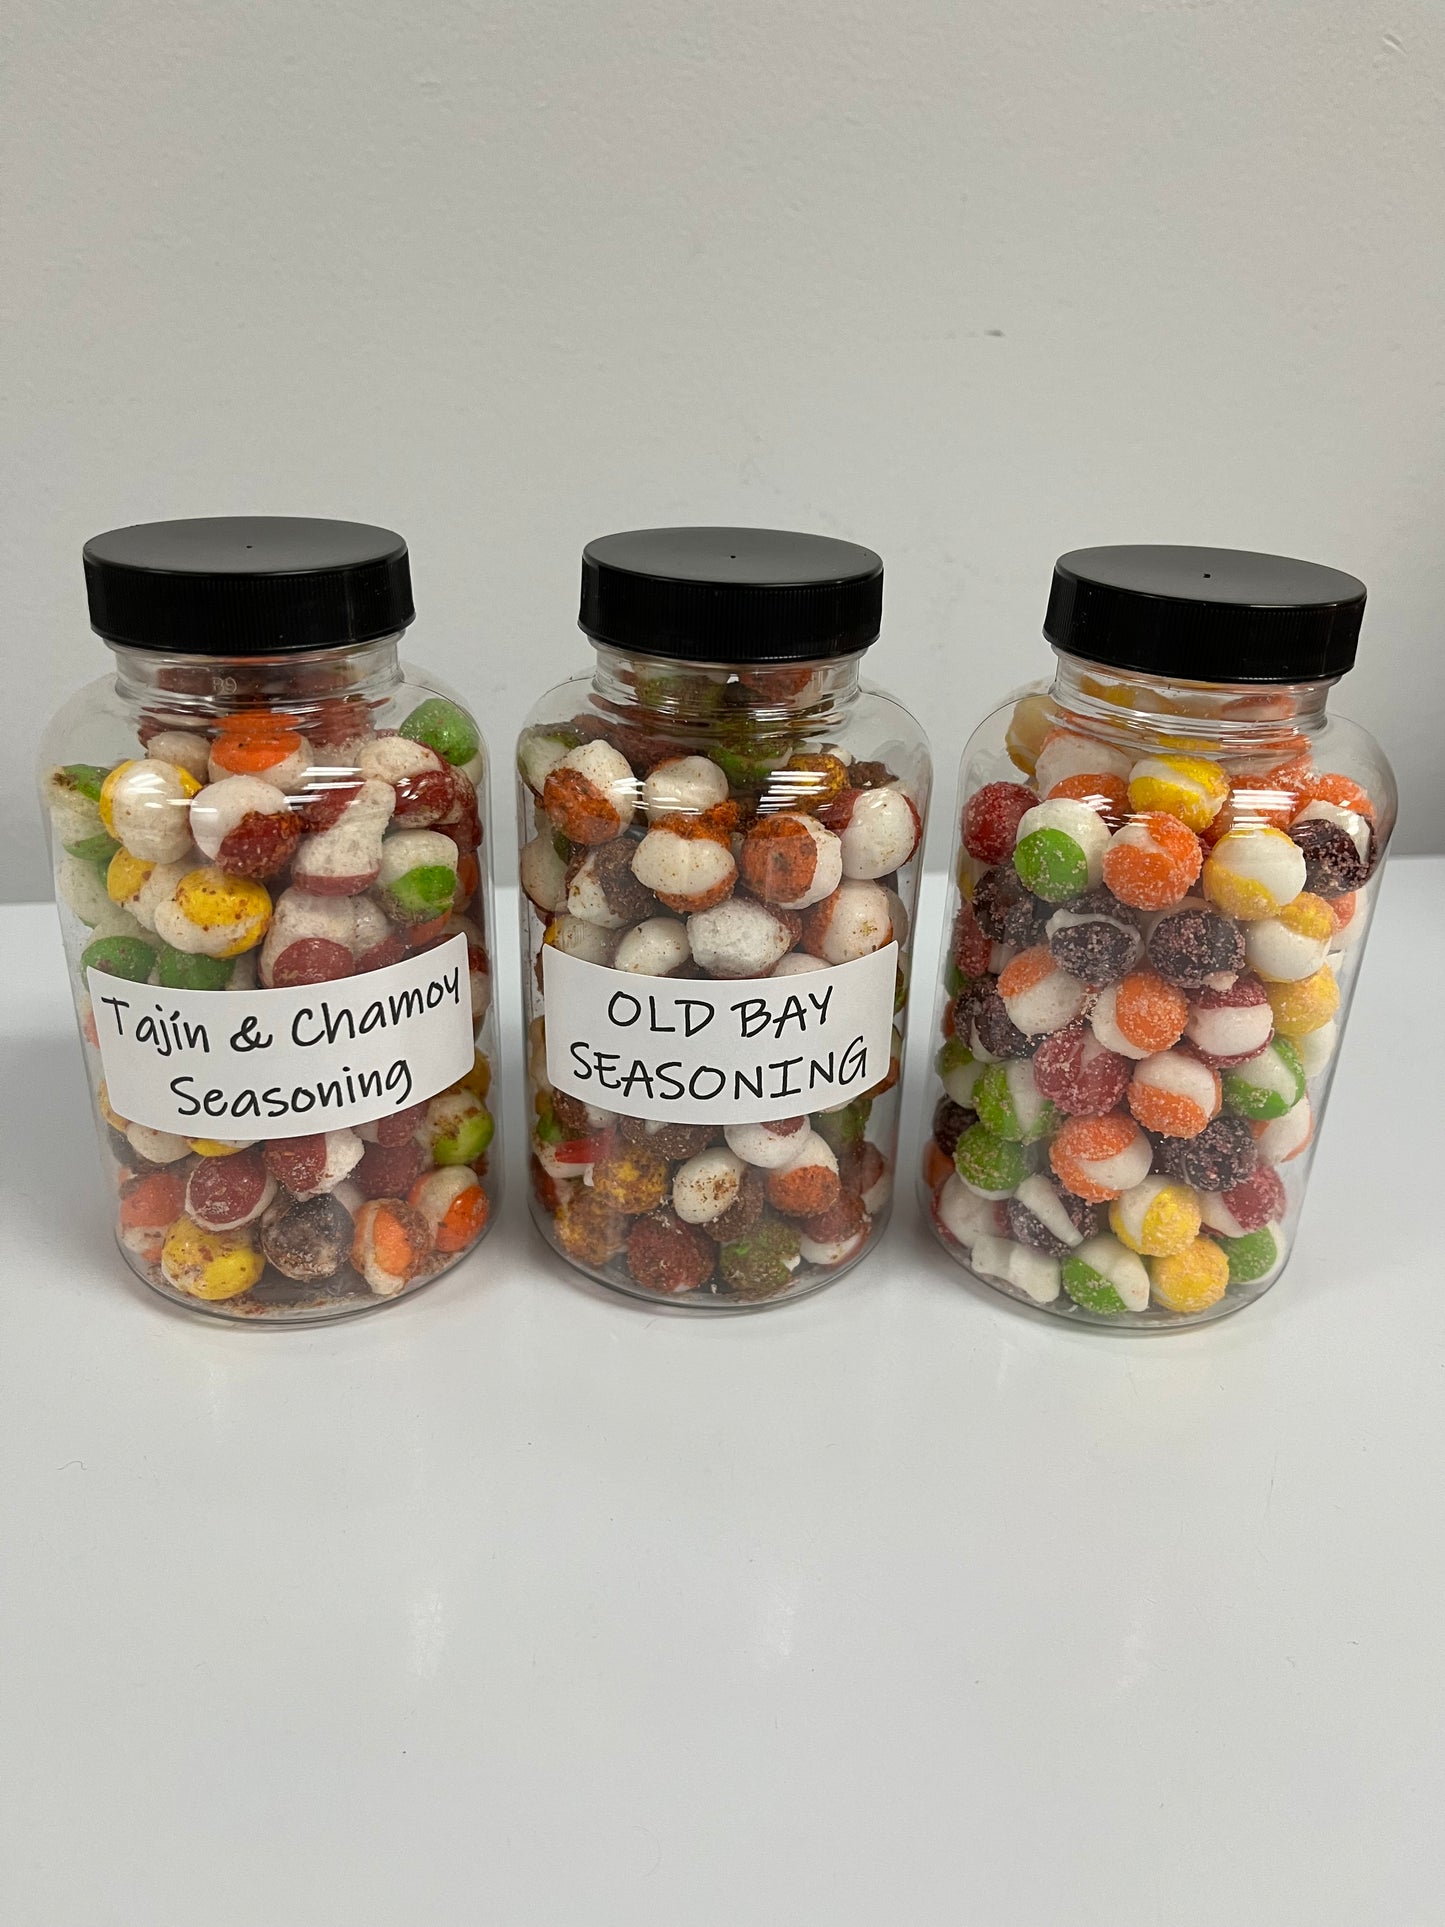 Savory and Sour Freeze Dried Candy Sampler - FREE SHIPPING!